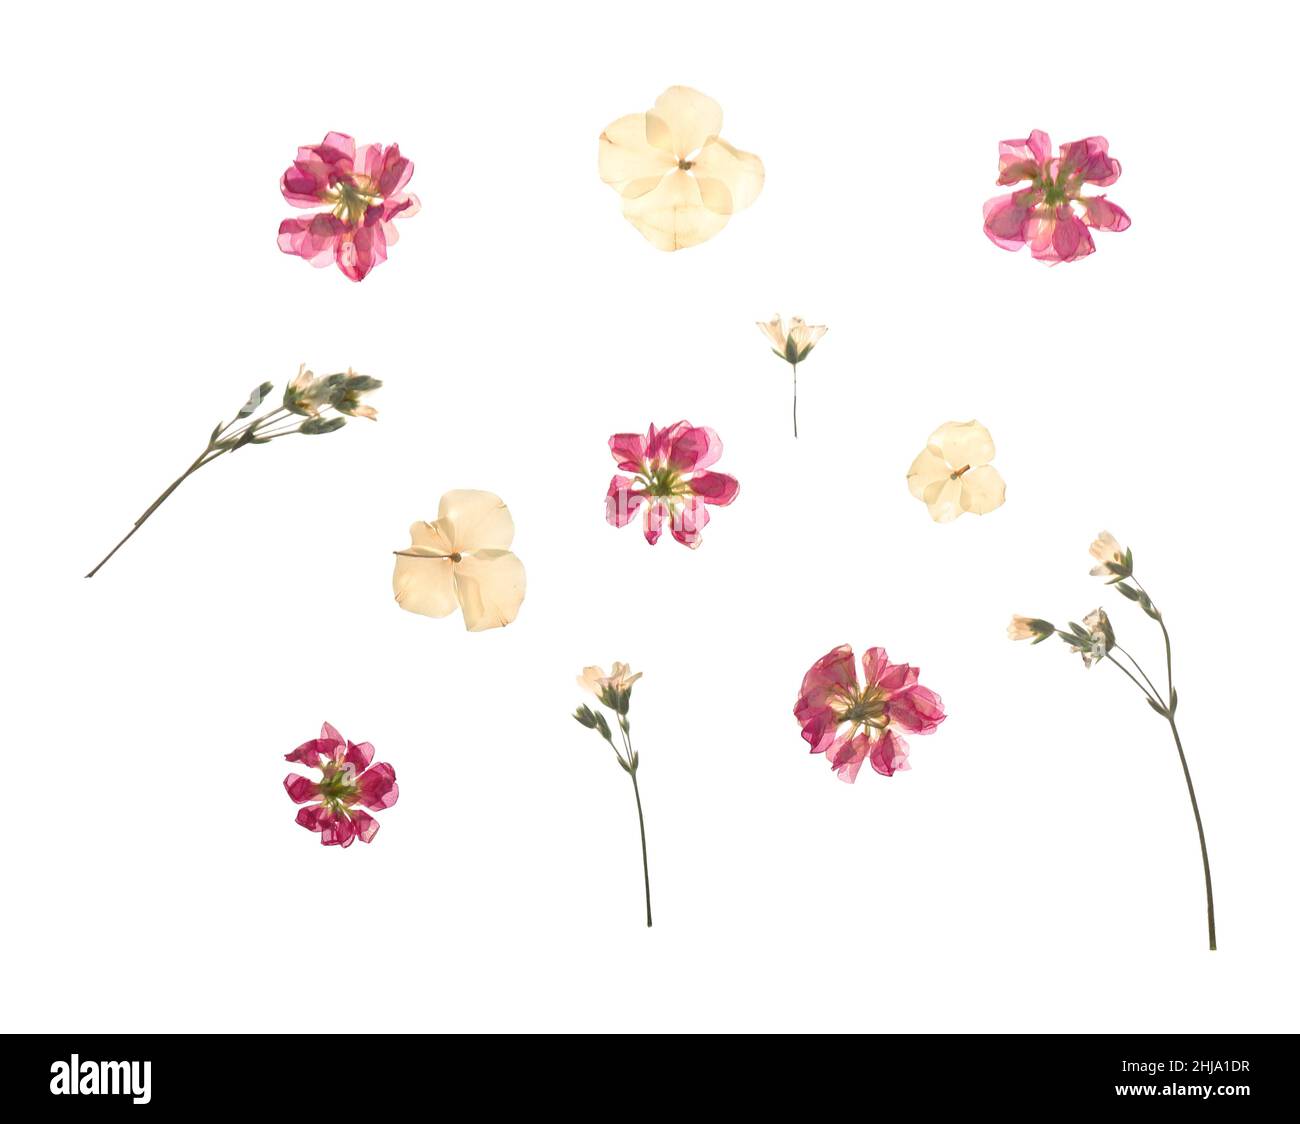 Composition of dried wildflowers isolated on a white background